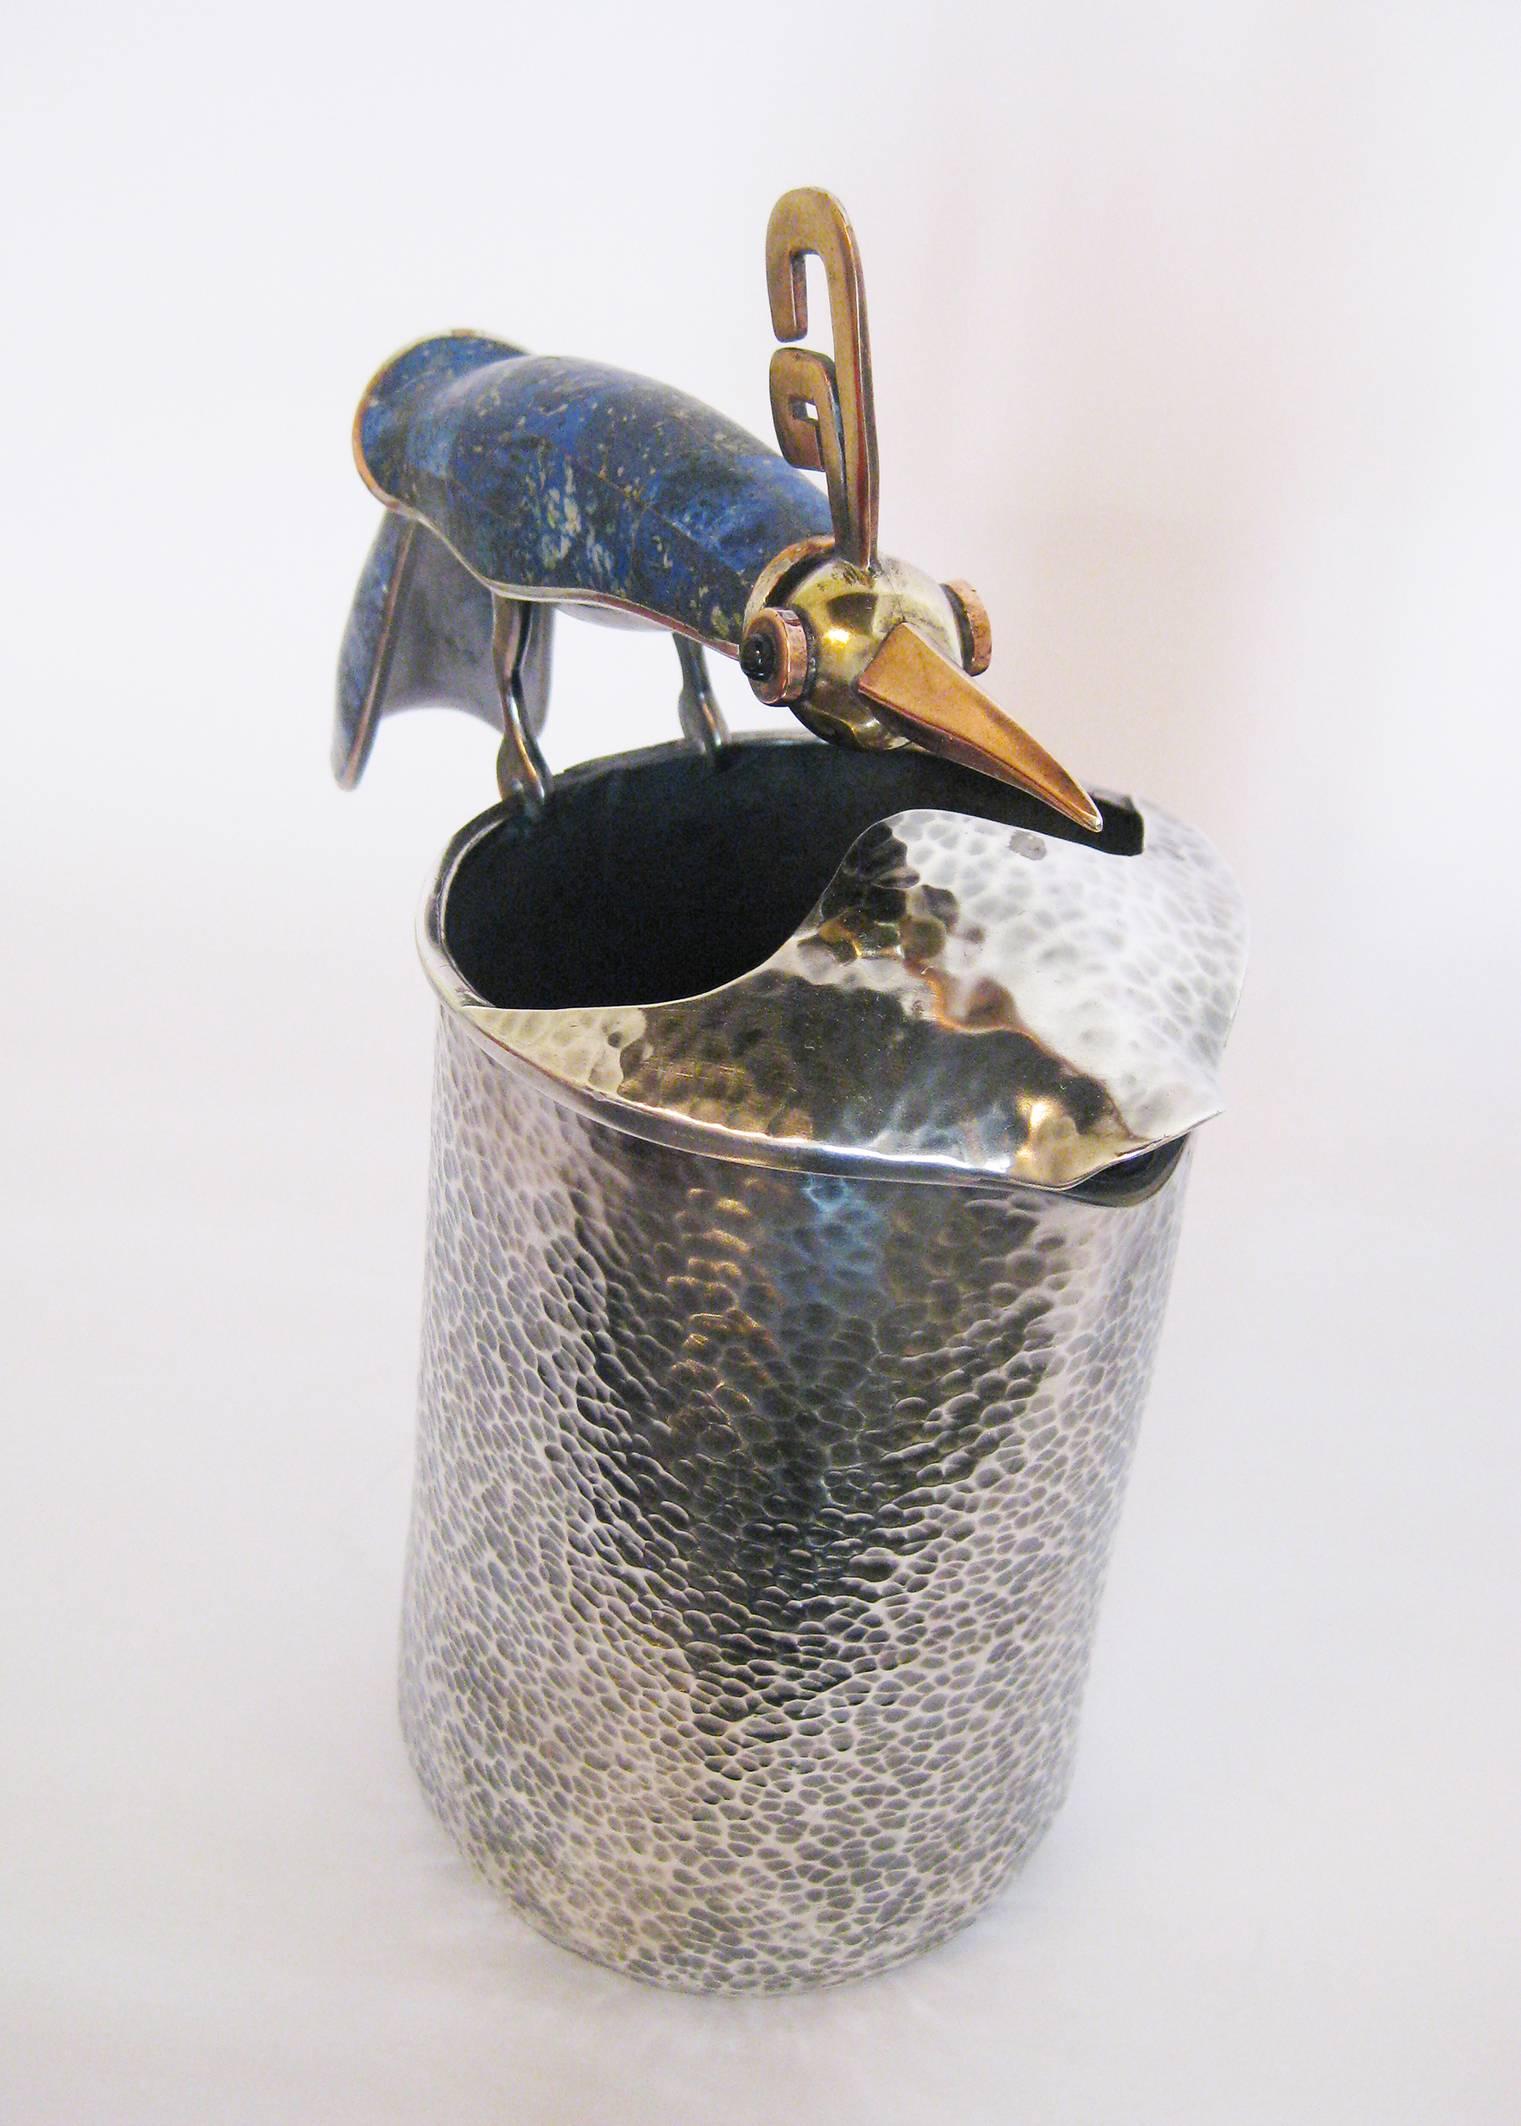 Mexican Pitcher of Silver, Brass, Copper and Lapis Lazuli by Los Castillo